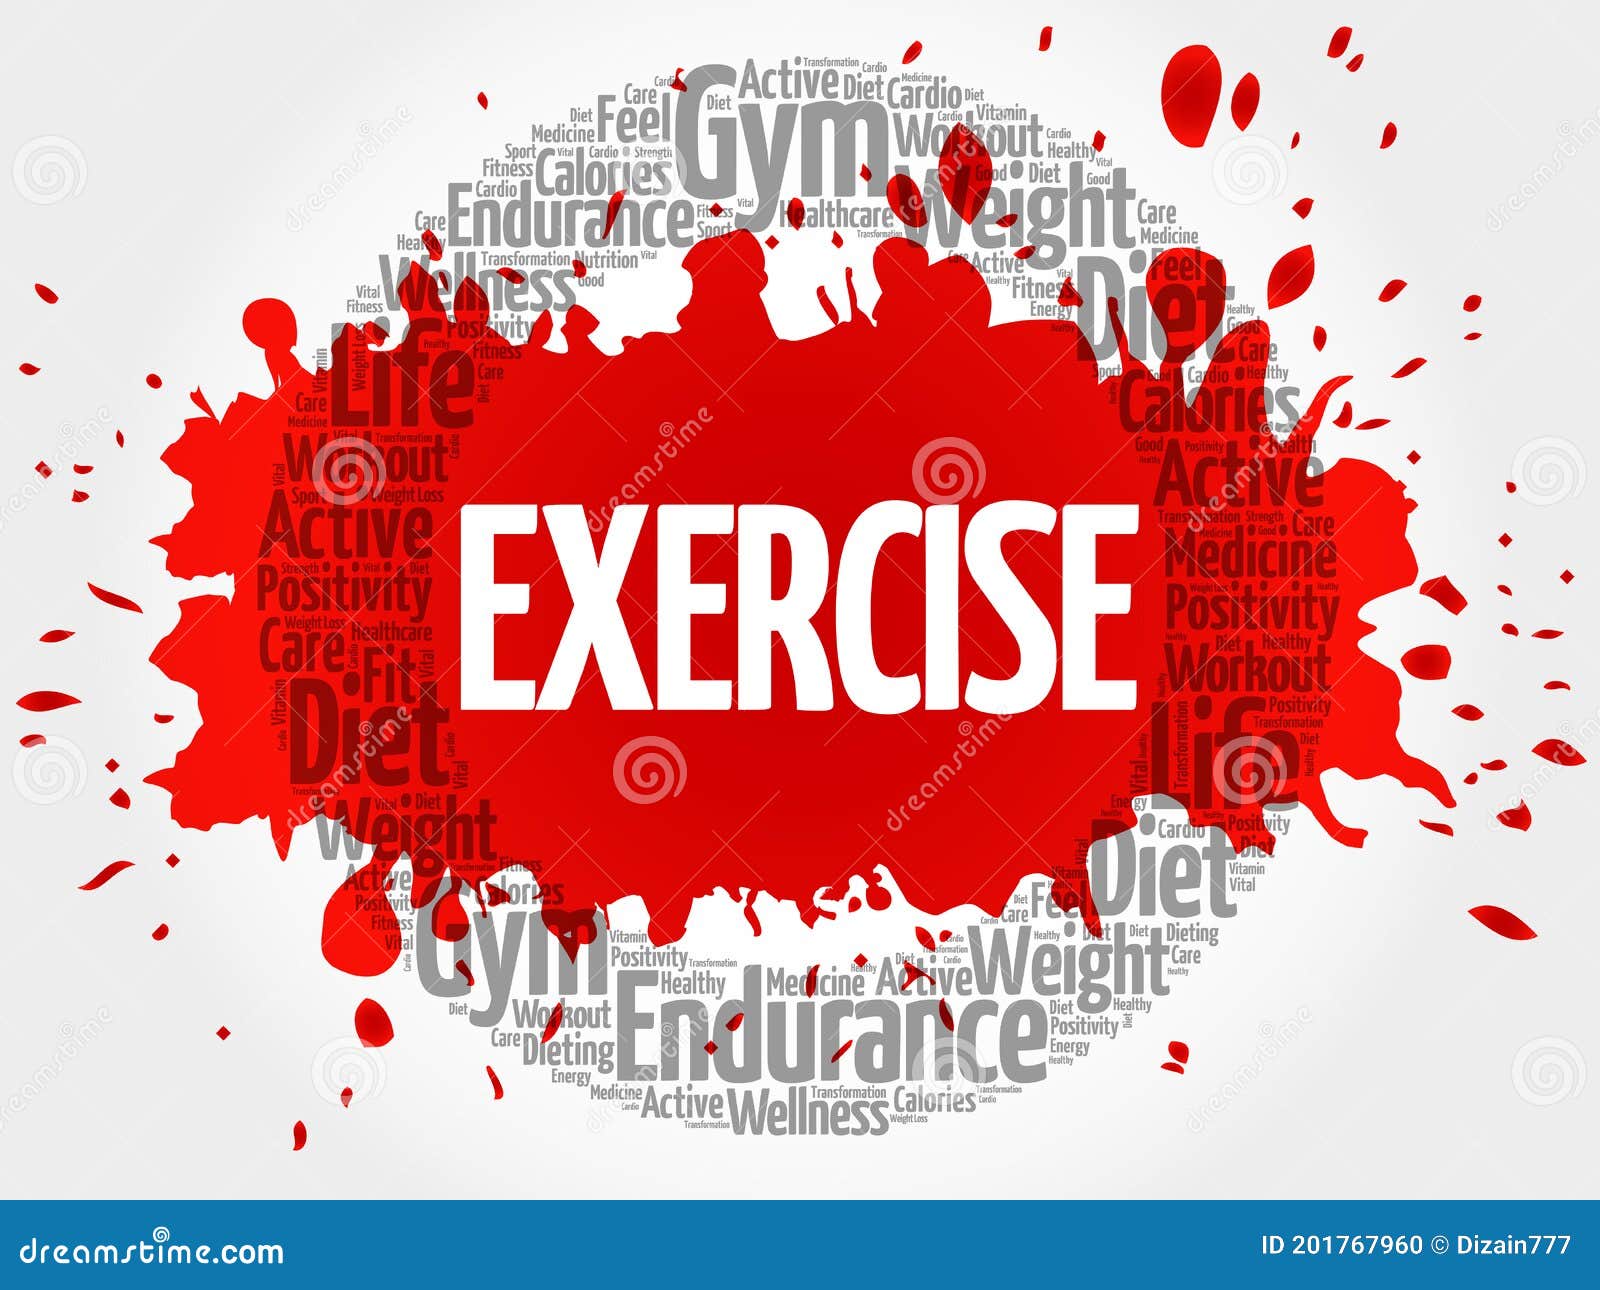 Fitness Exercise Word Icon Cloud Stock Illustrations – 200 Fitness Exercise  Word Icon Cloud Stock Illustrations, Vectors & Clipart - Dreamstime